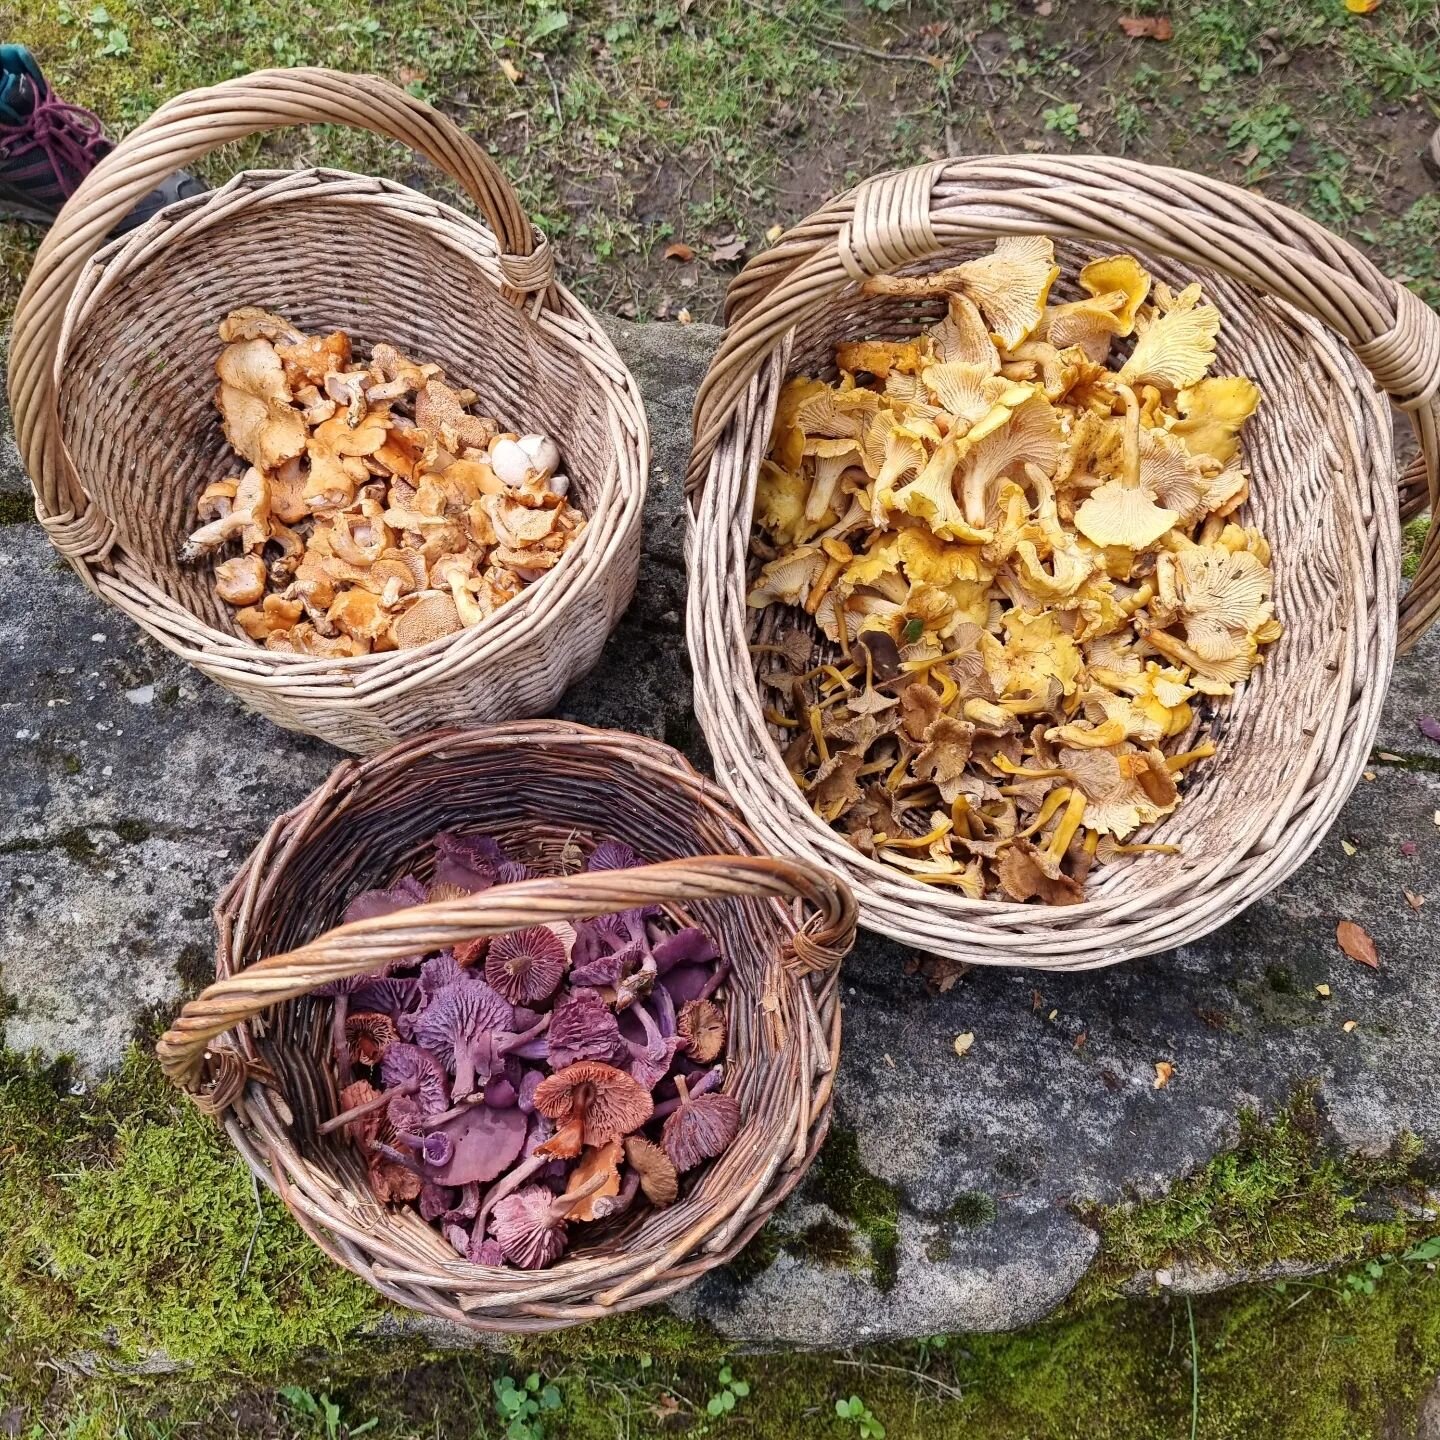 We were very lucky to join Chlo&eacute; from @gourmet.gatherings on a recent mushroom forage in the #wyevalley. What a morning of fungi fun and facts it was! The Mushroom Gods were certainly shining down on us - just look at those stunning Chanterell